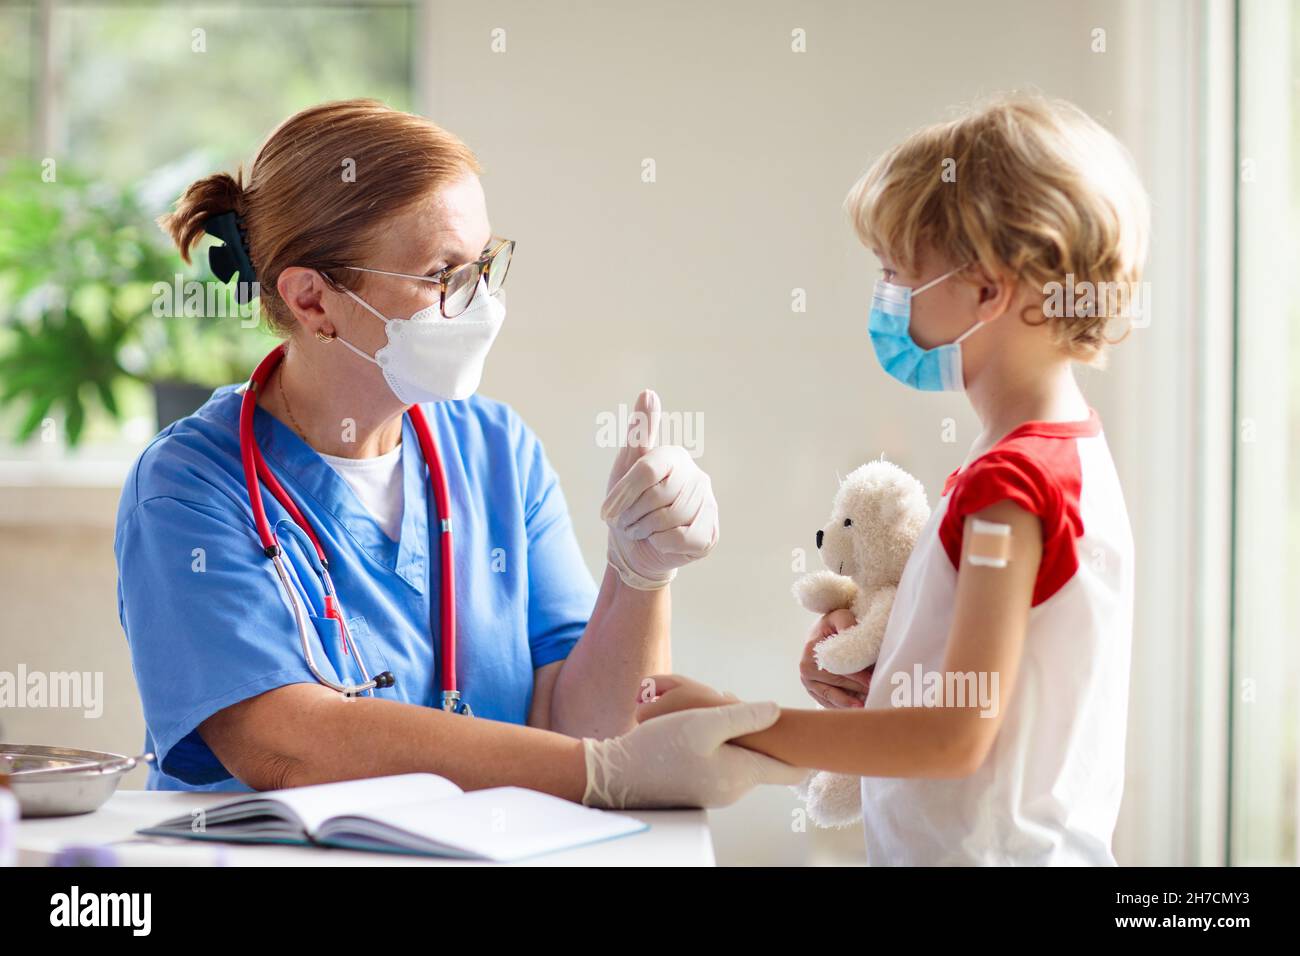 Child getting covid-19 vaccine. Coronavirus vaccination for young kids. Doctor giving kid patient covid shot. Immunization program for adolescents Stock Photo